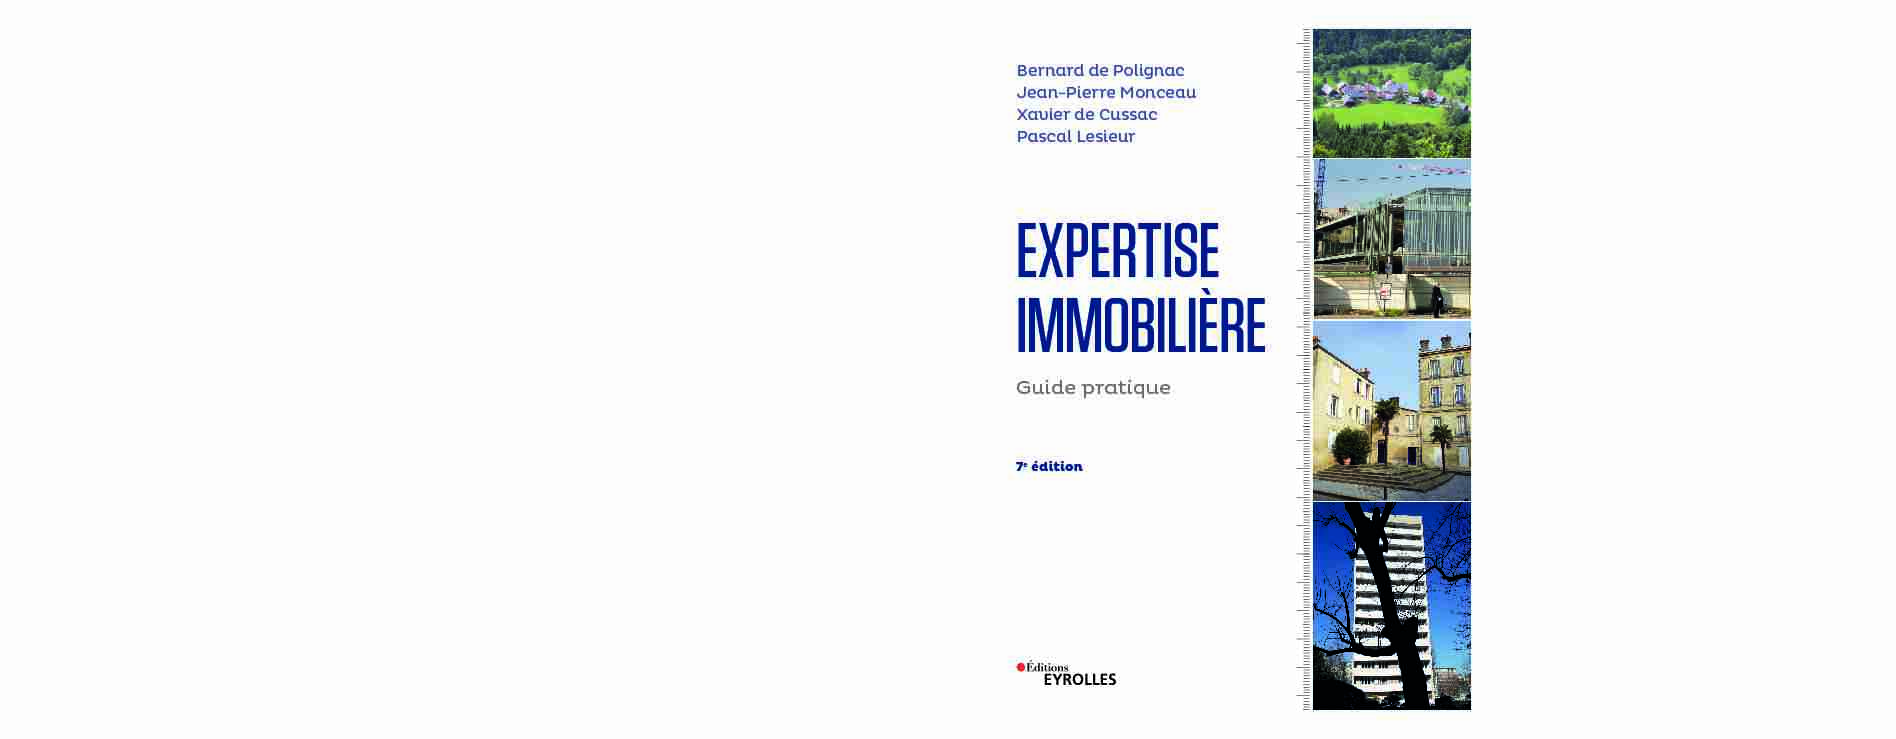 EXPERTISE ImmobIlIèRE